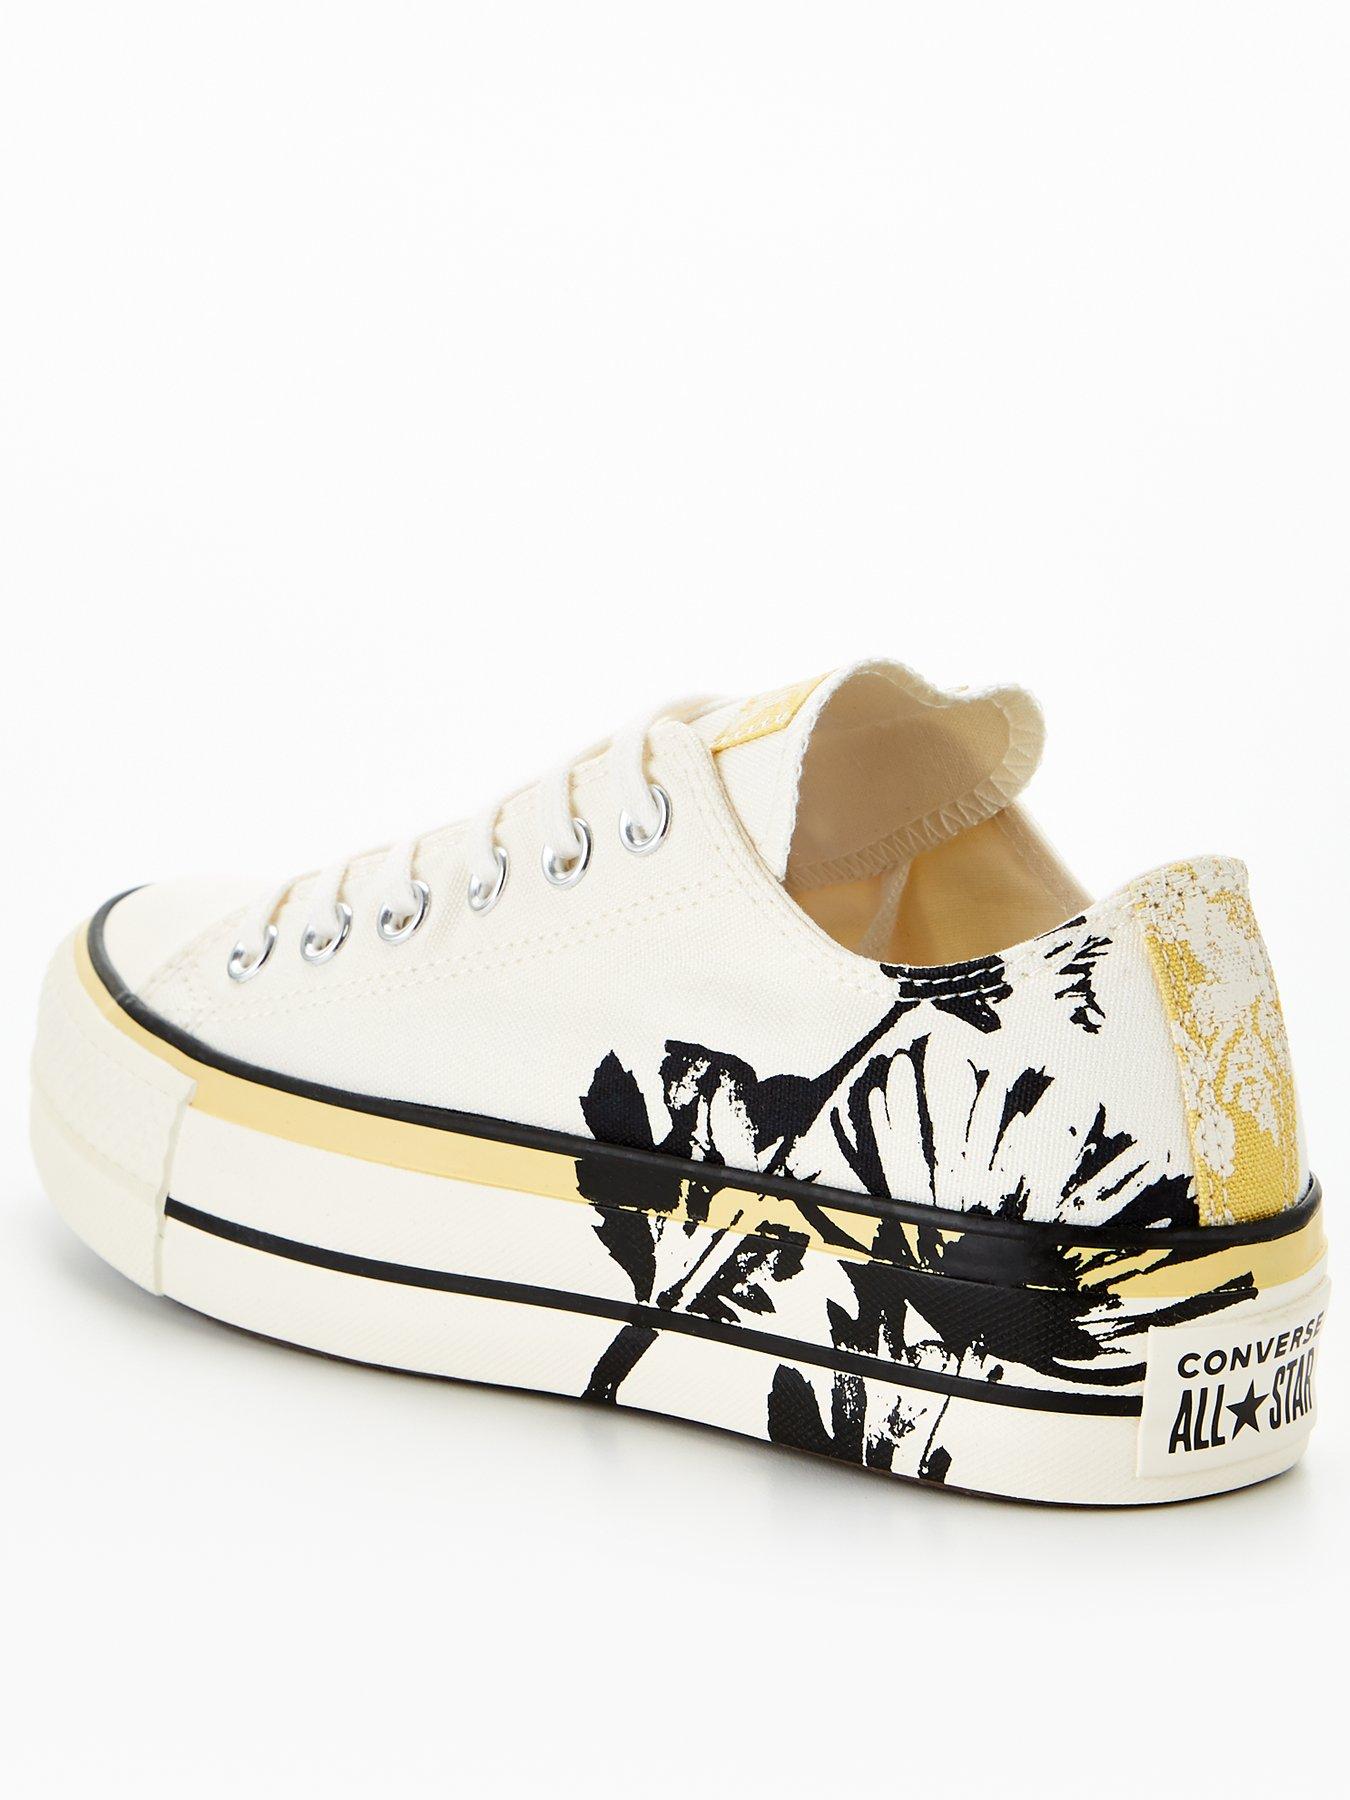 Trainers Floral Fusion Platform Ox - Off White